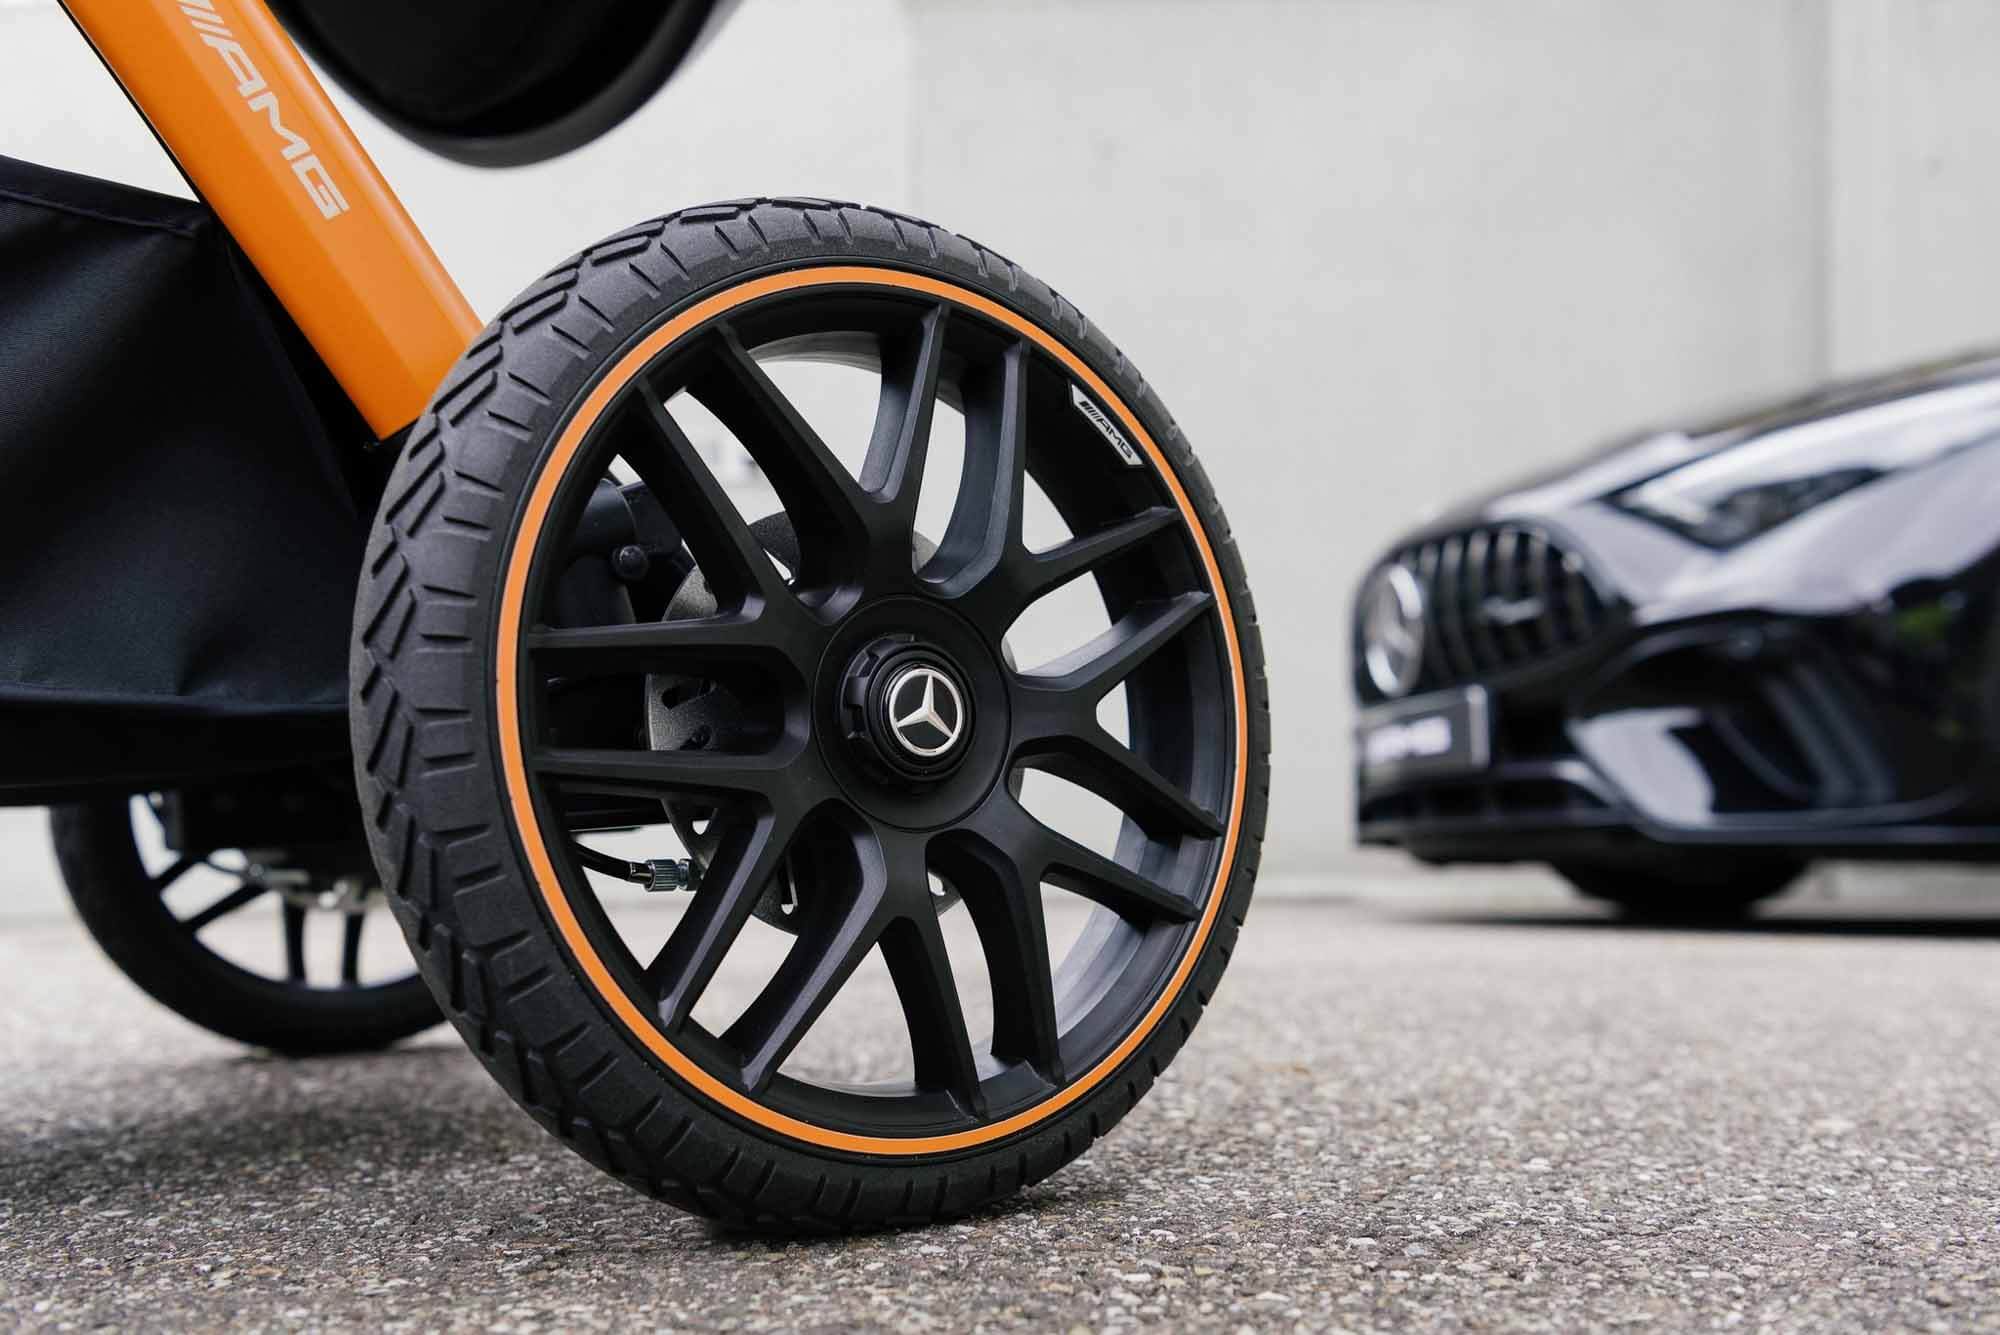 Mercedes-Benz has released a line of “off-road” and “sports” strollers